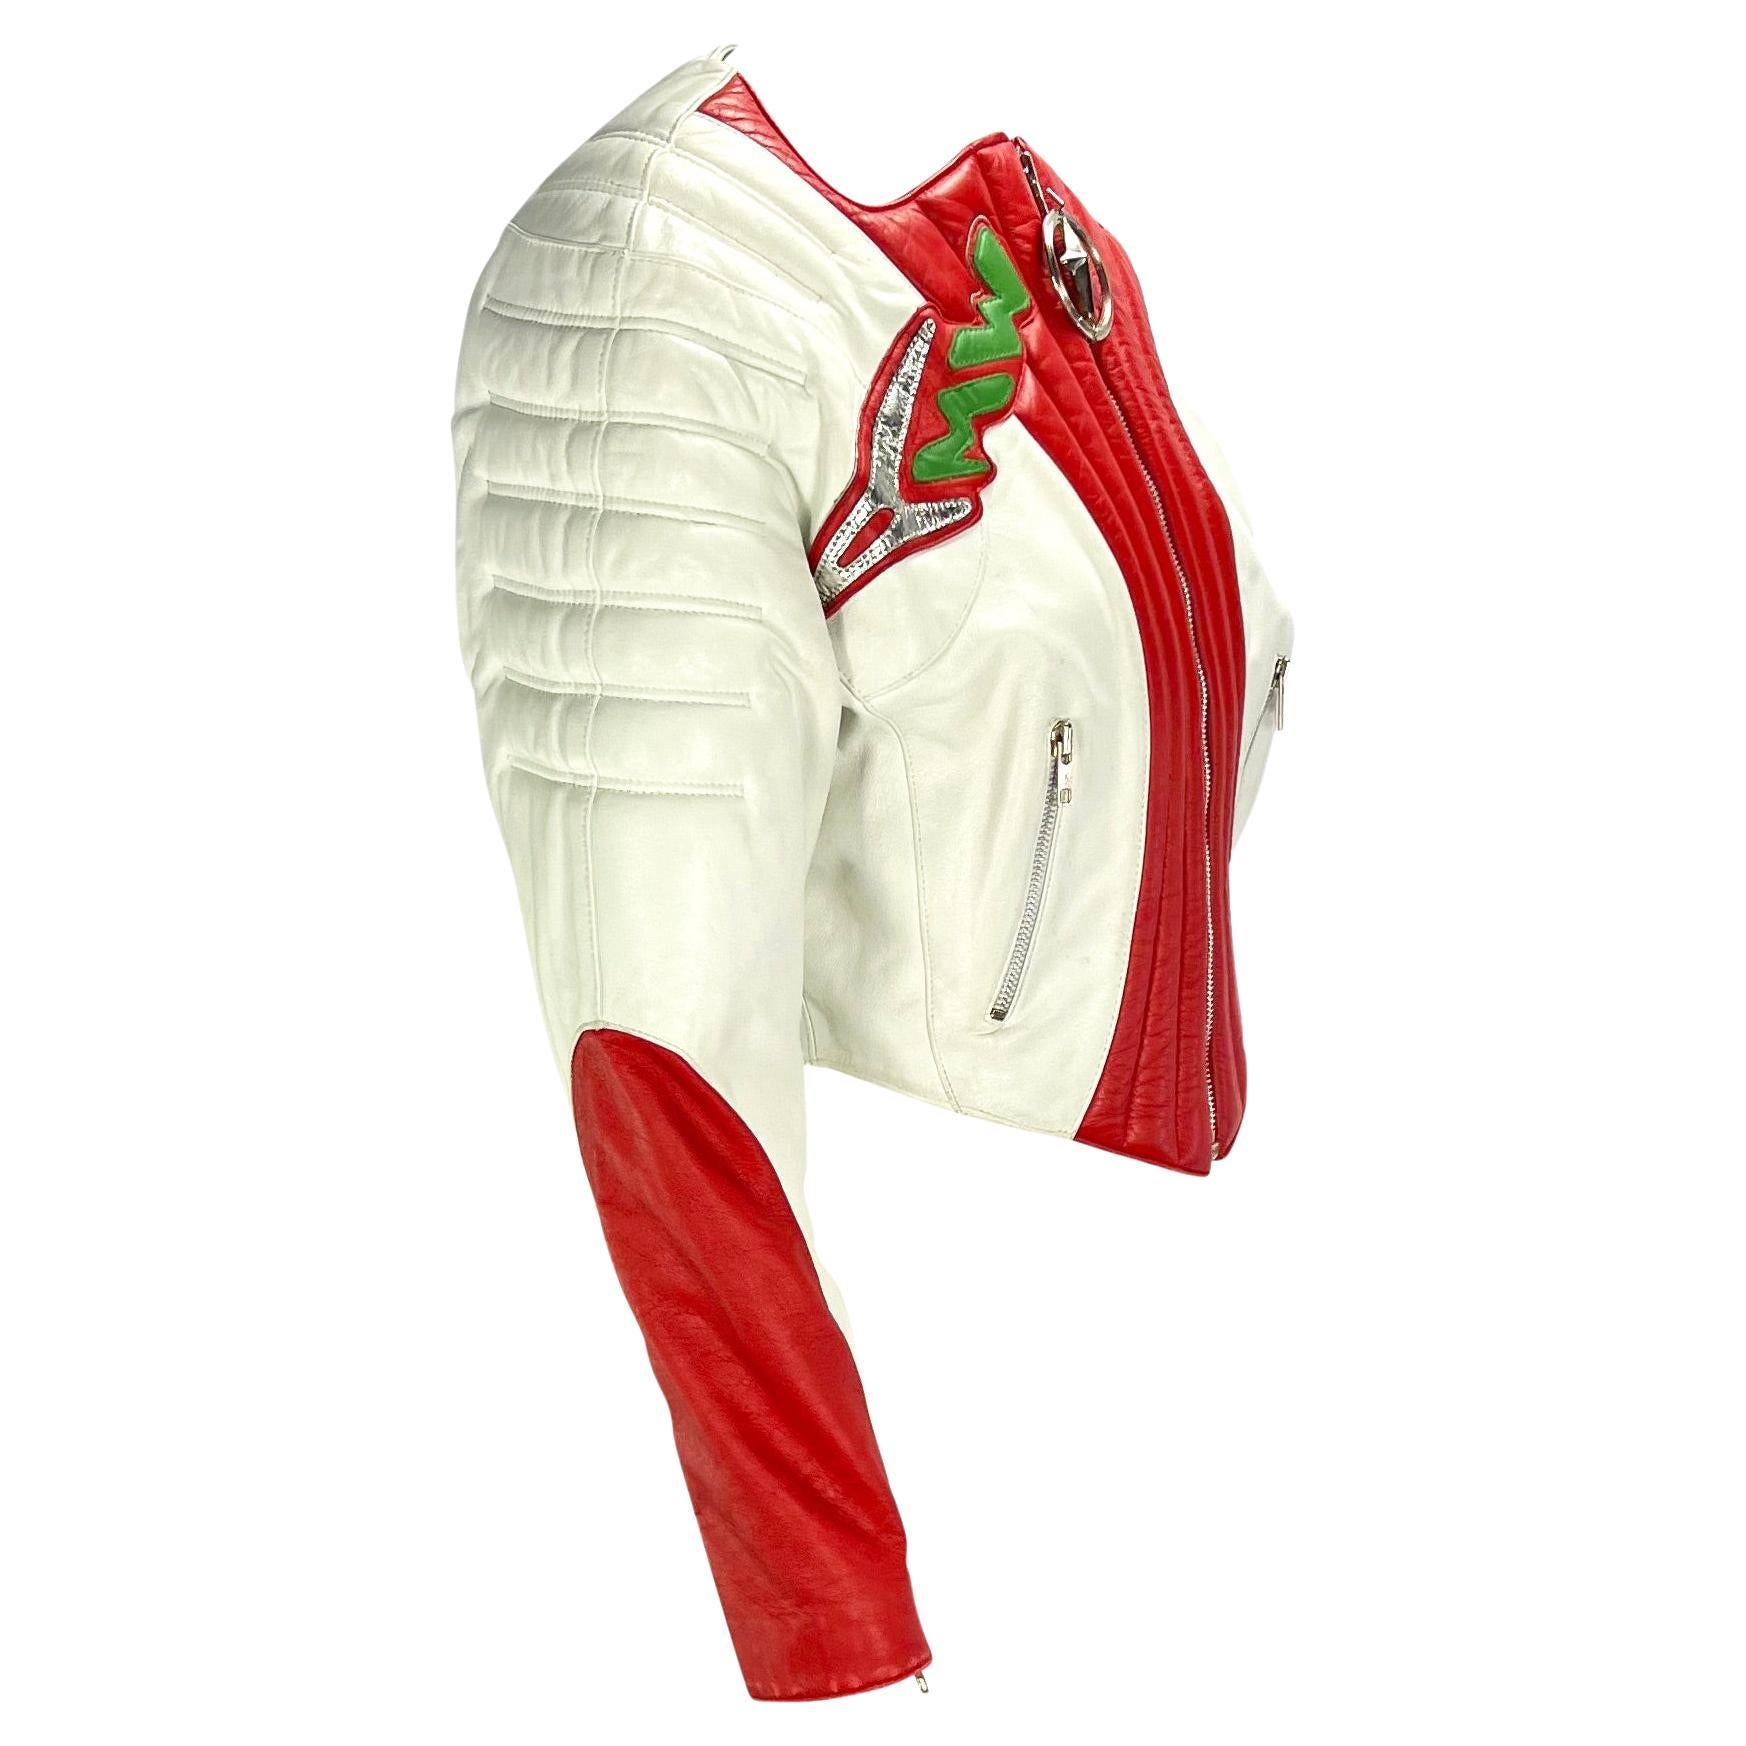 S/S 1990 Thierry Mugler Padded White Red Leather Space Age Motorcycle Zip Jacket 1